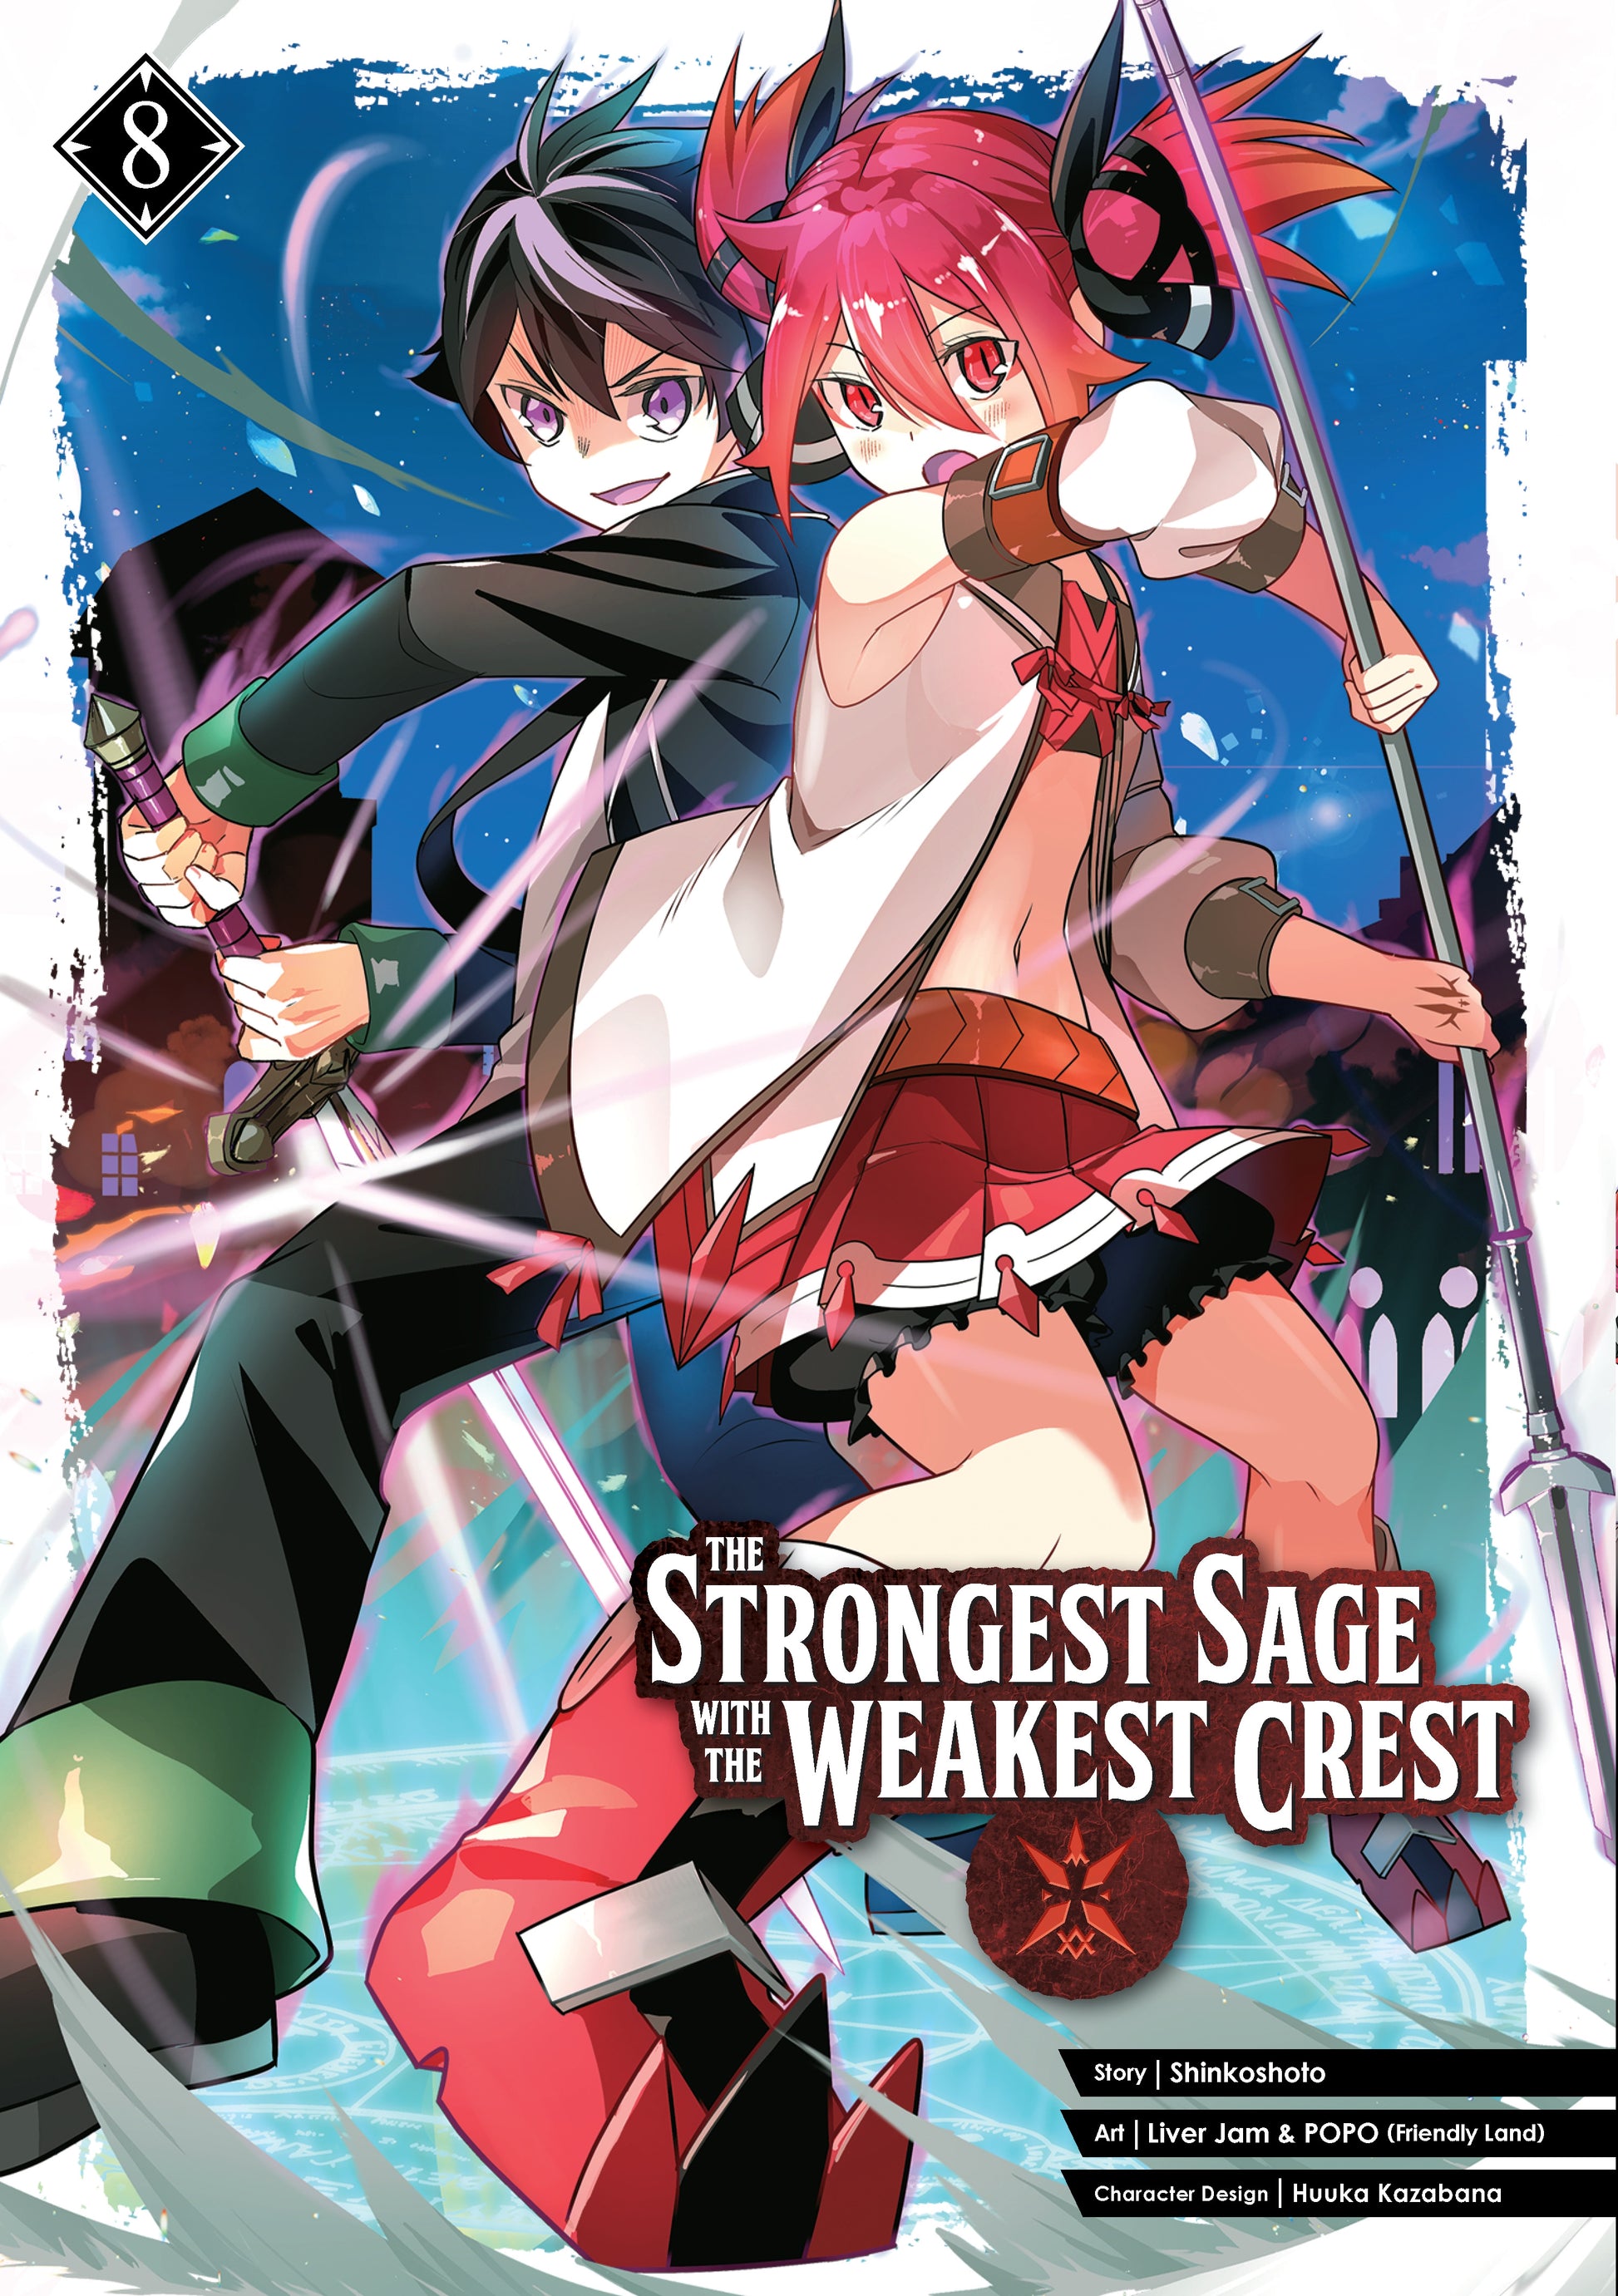 The Strongest Sage with the Weakest Crest 08 - Manga Warehouse